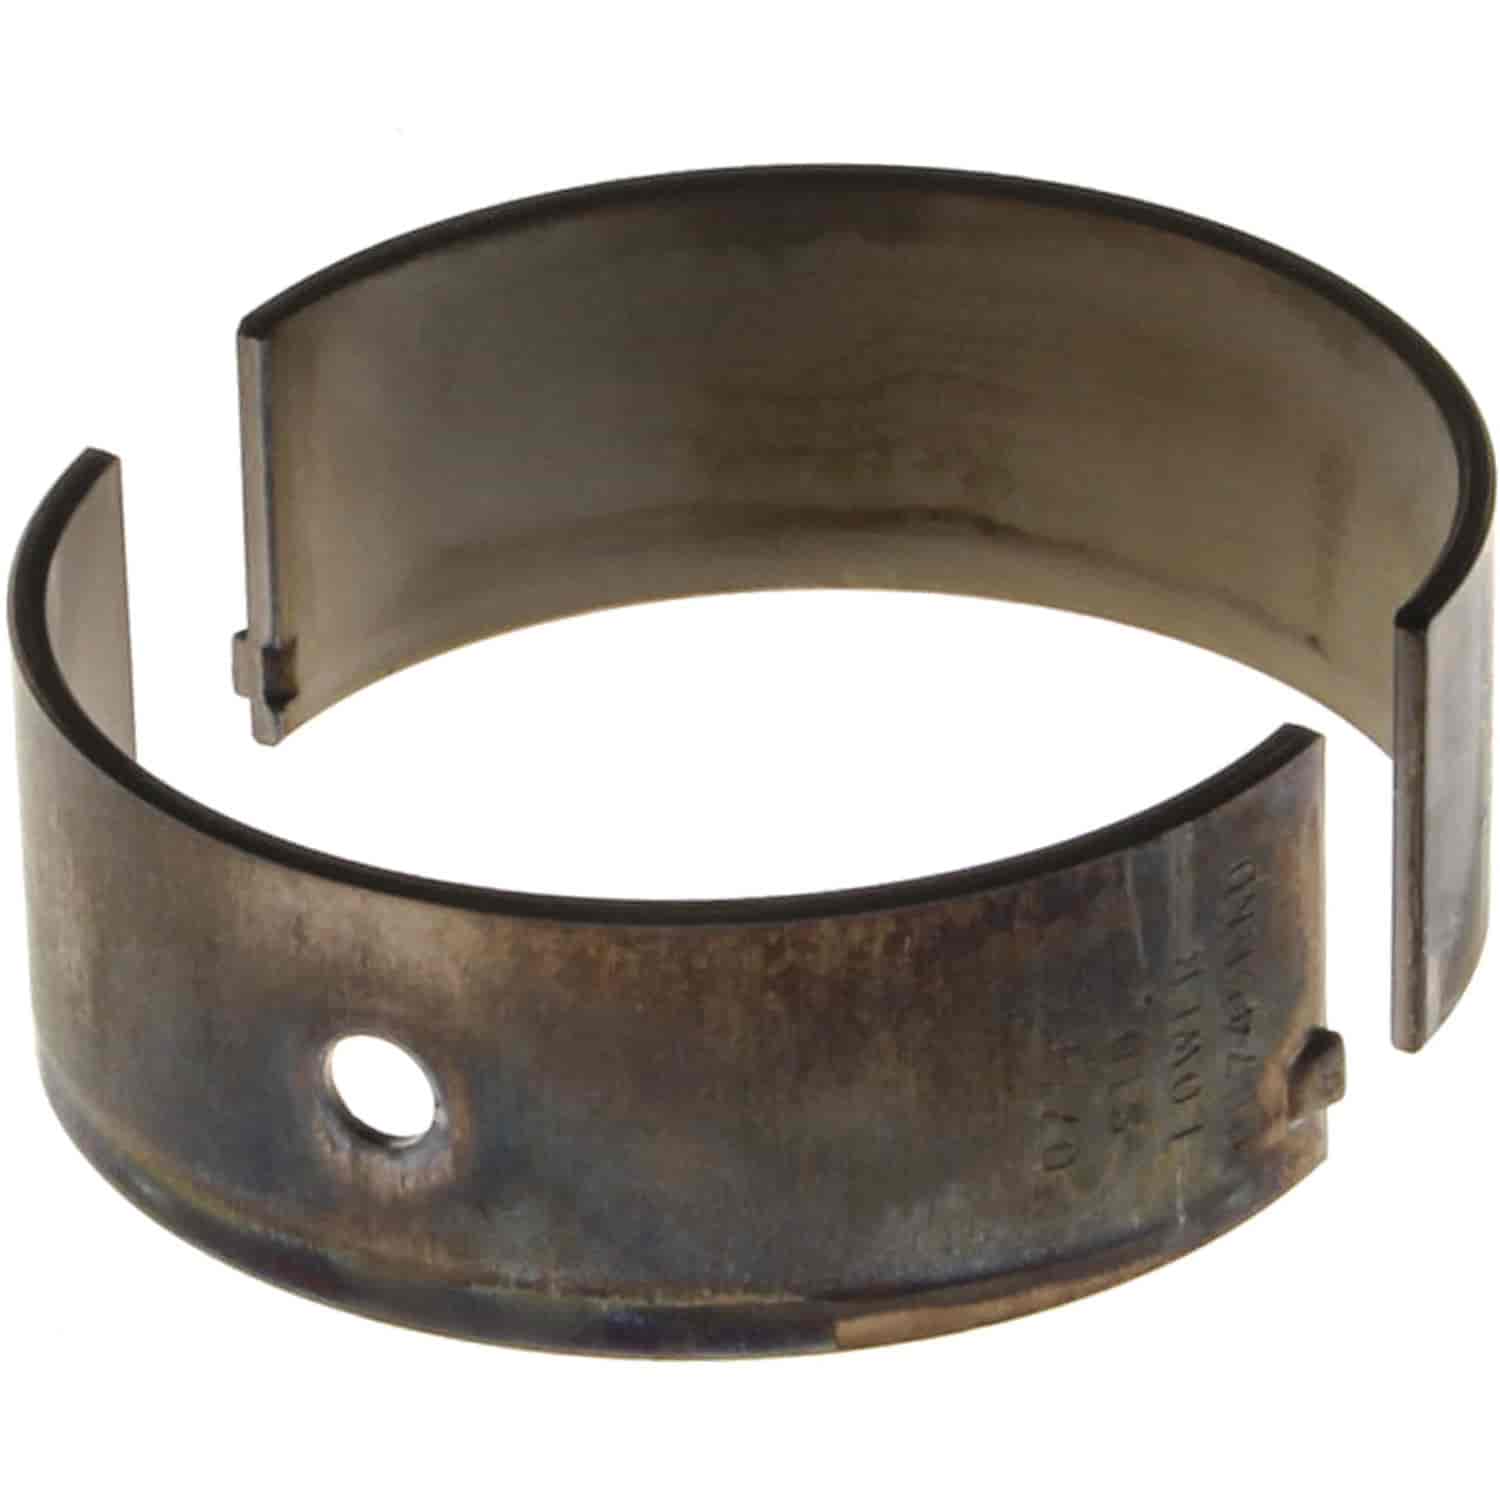 Connecting Rod Bearing Chevy 1955-2003 V8 265/283/302/327; L6 194/215/230/241/250; L4 2.0/2.2/2.3L with Standard Size